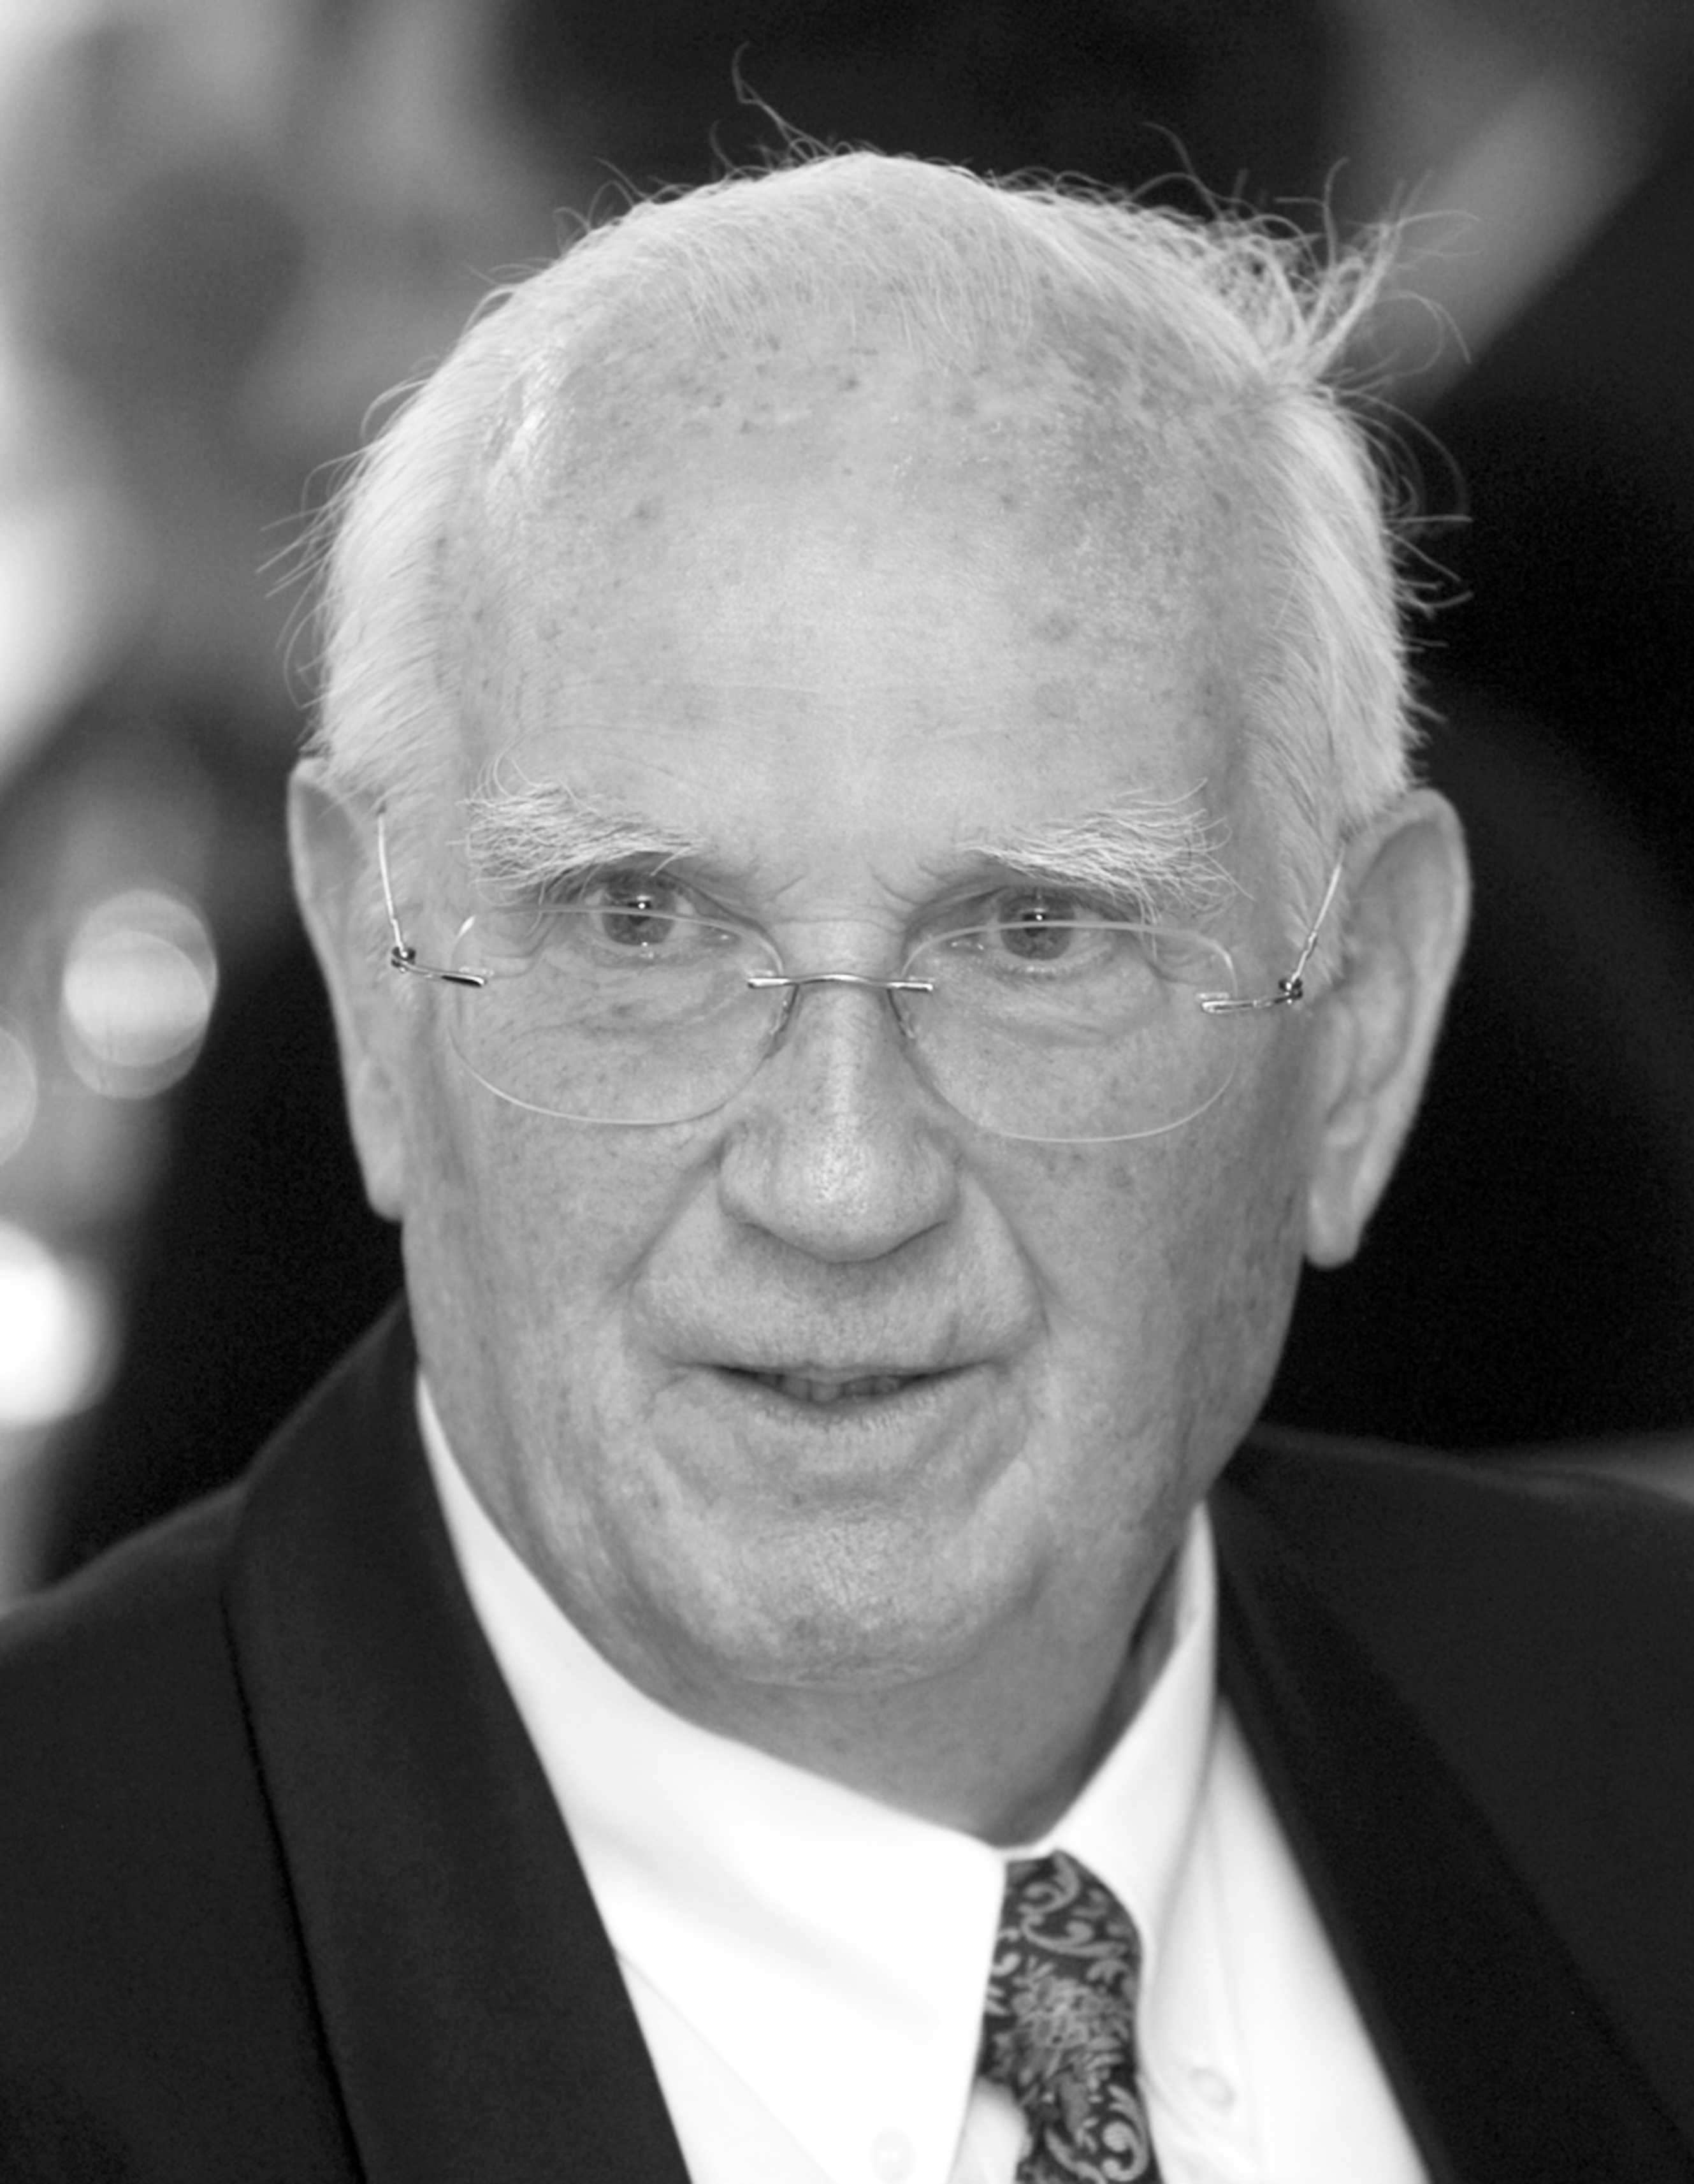 On February 1, 2018, the maxon motor group's longtime CEO and chairman of the board of directors passed away at the age of 91